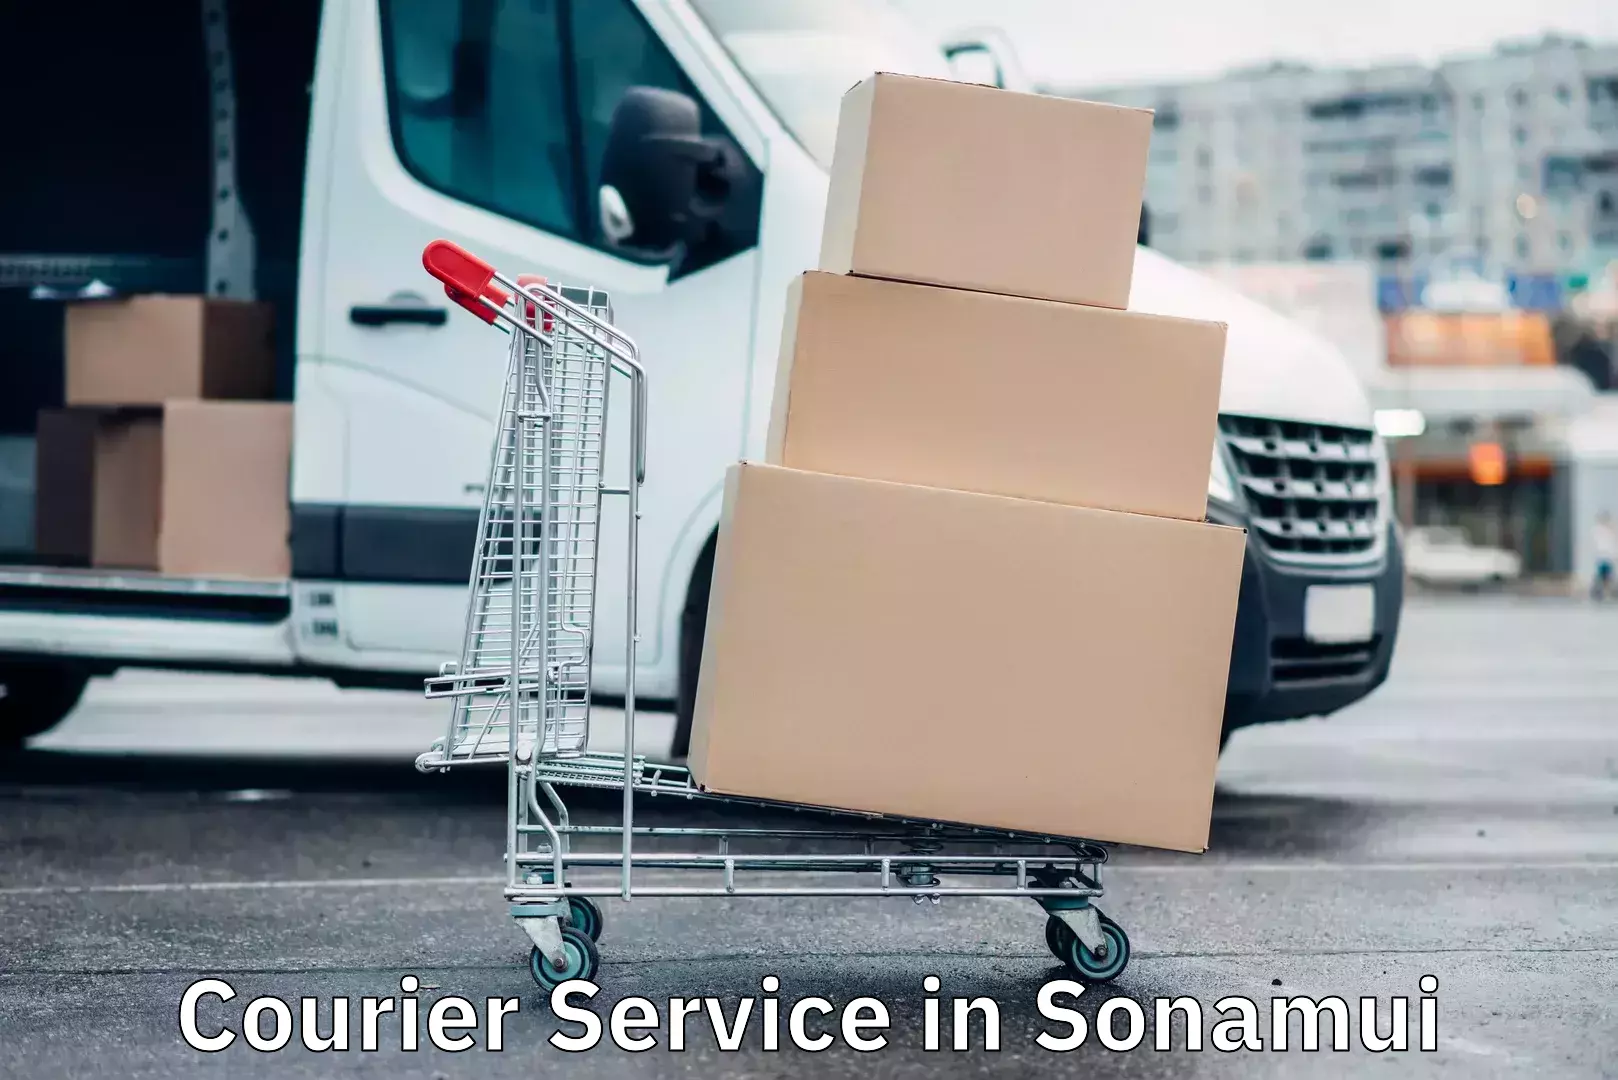 Courier service partnerships in Sonamui